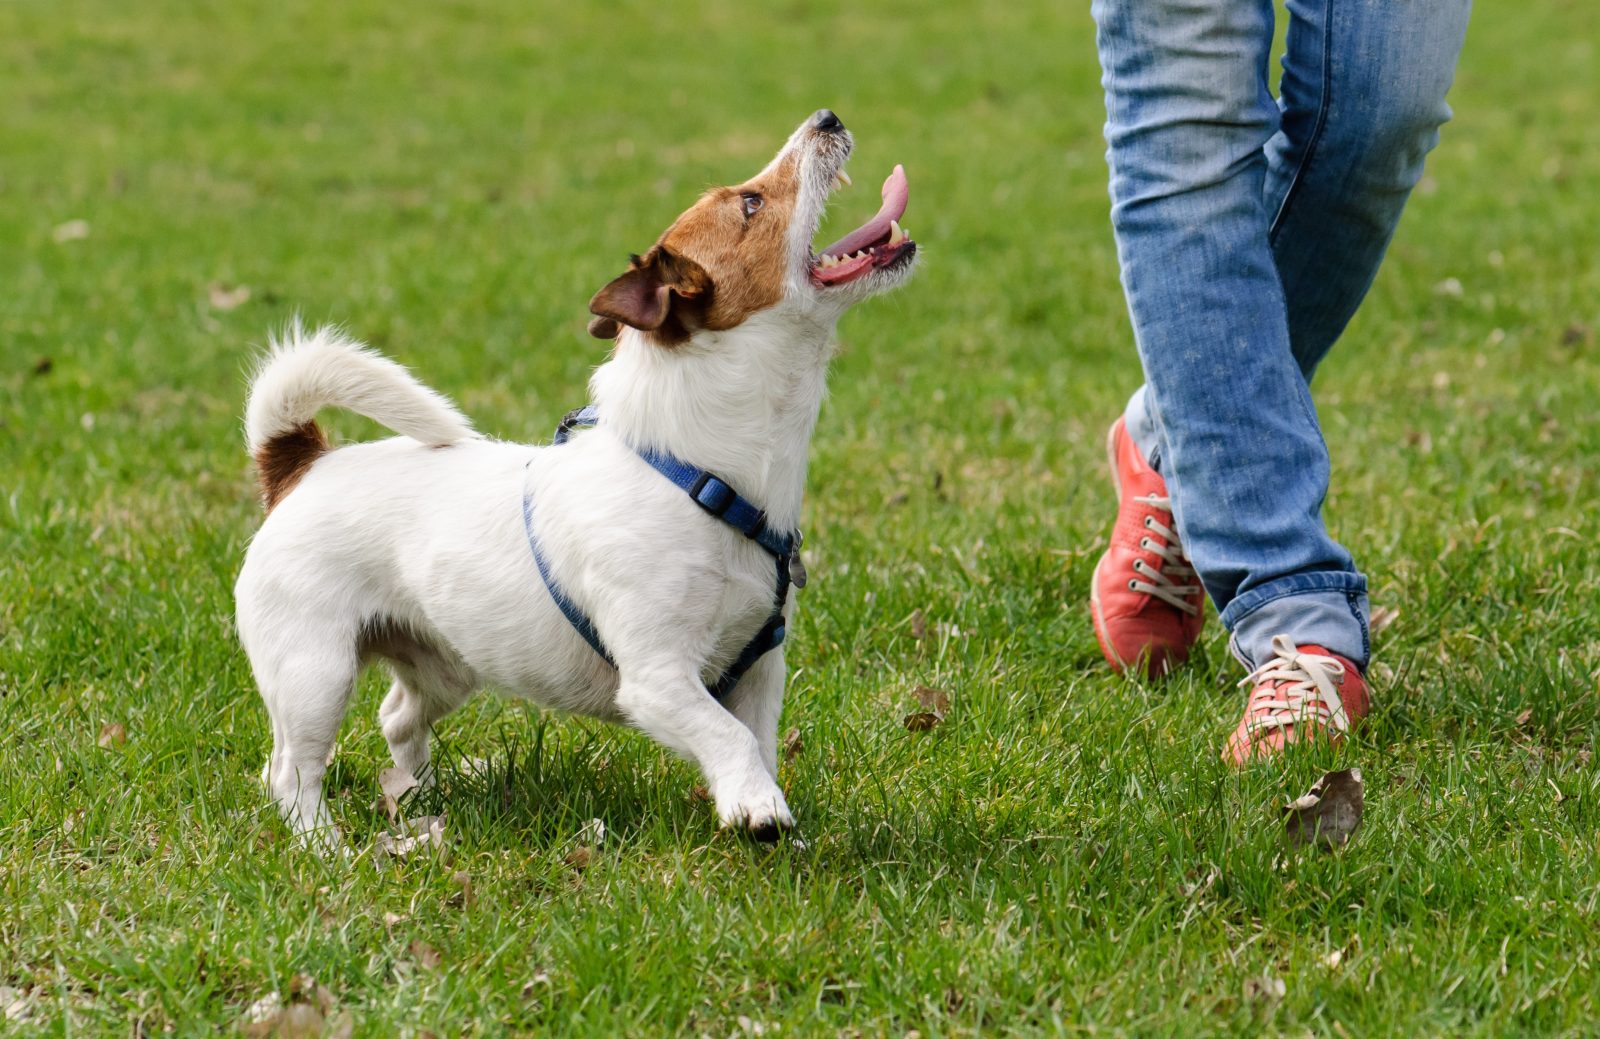 dog training tips - jack russel terrier running next to owner